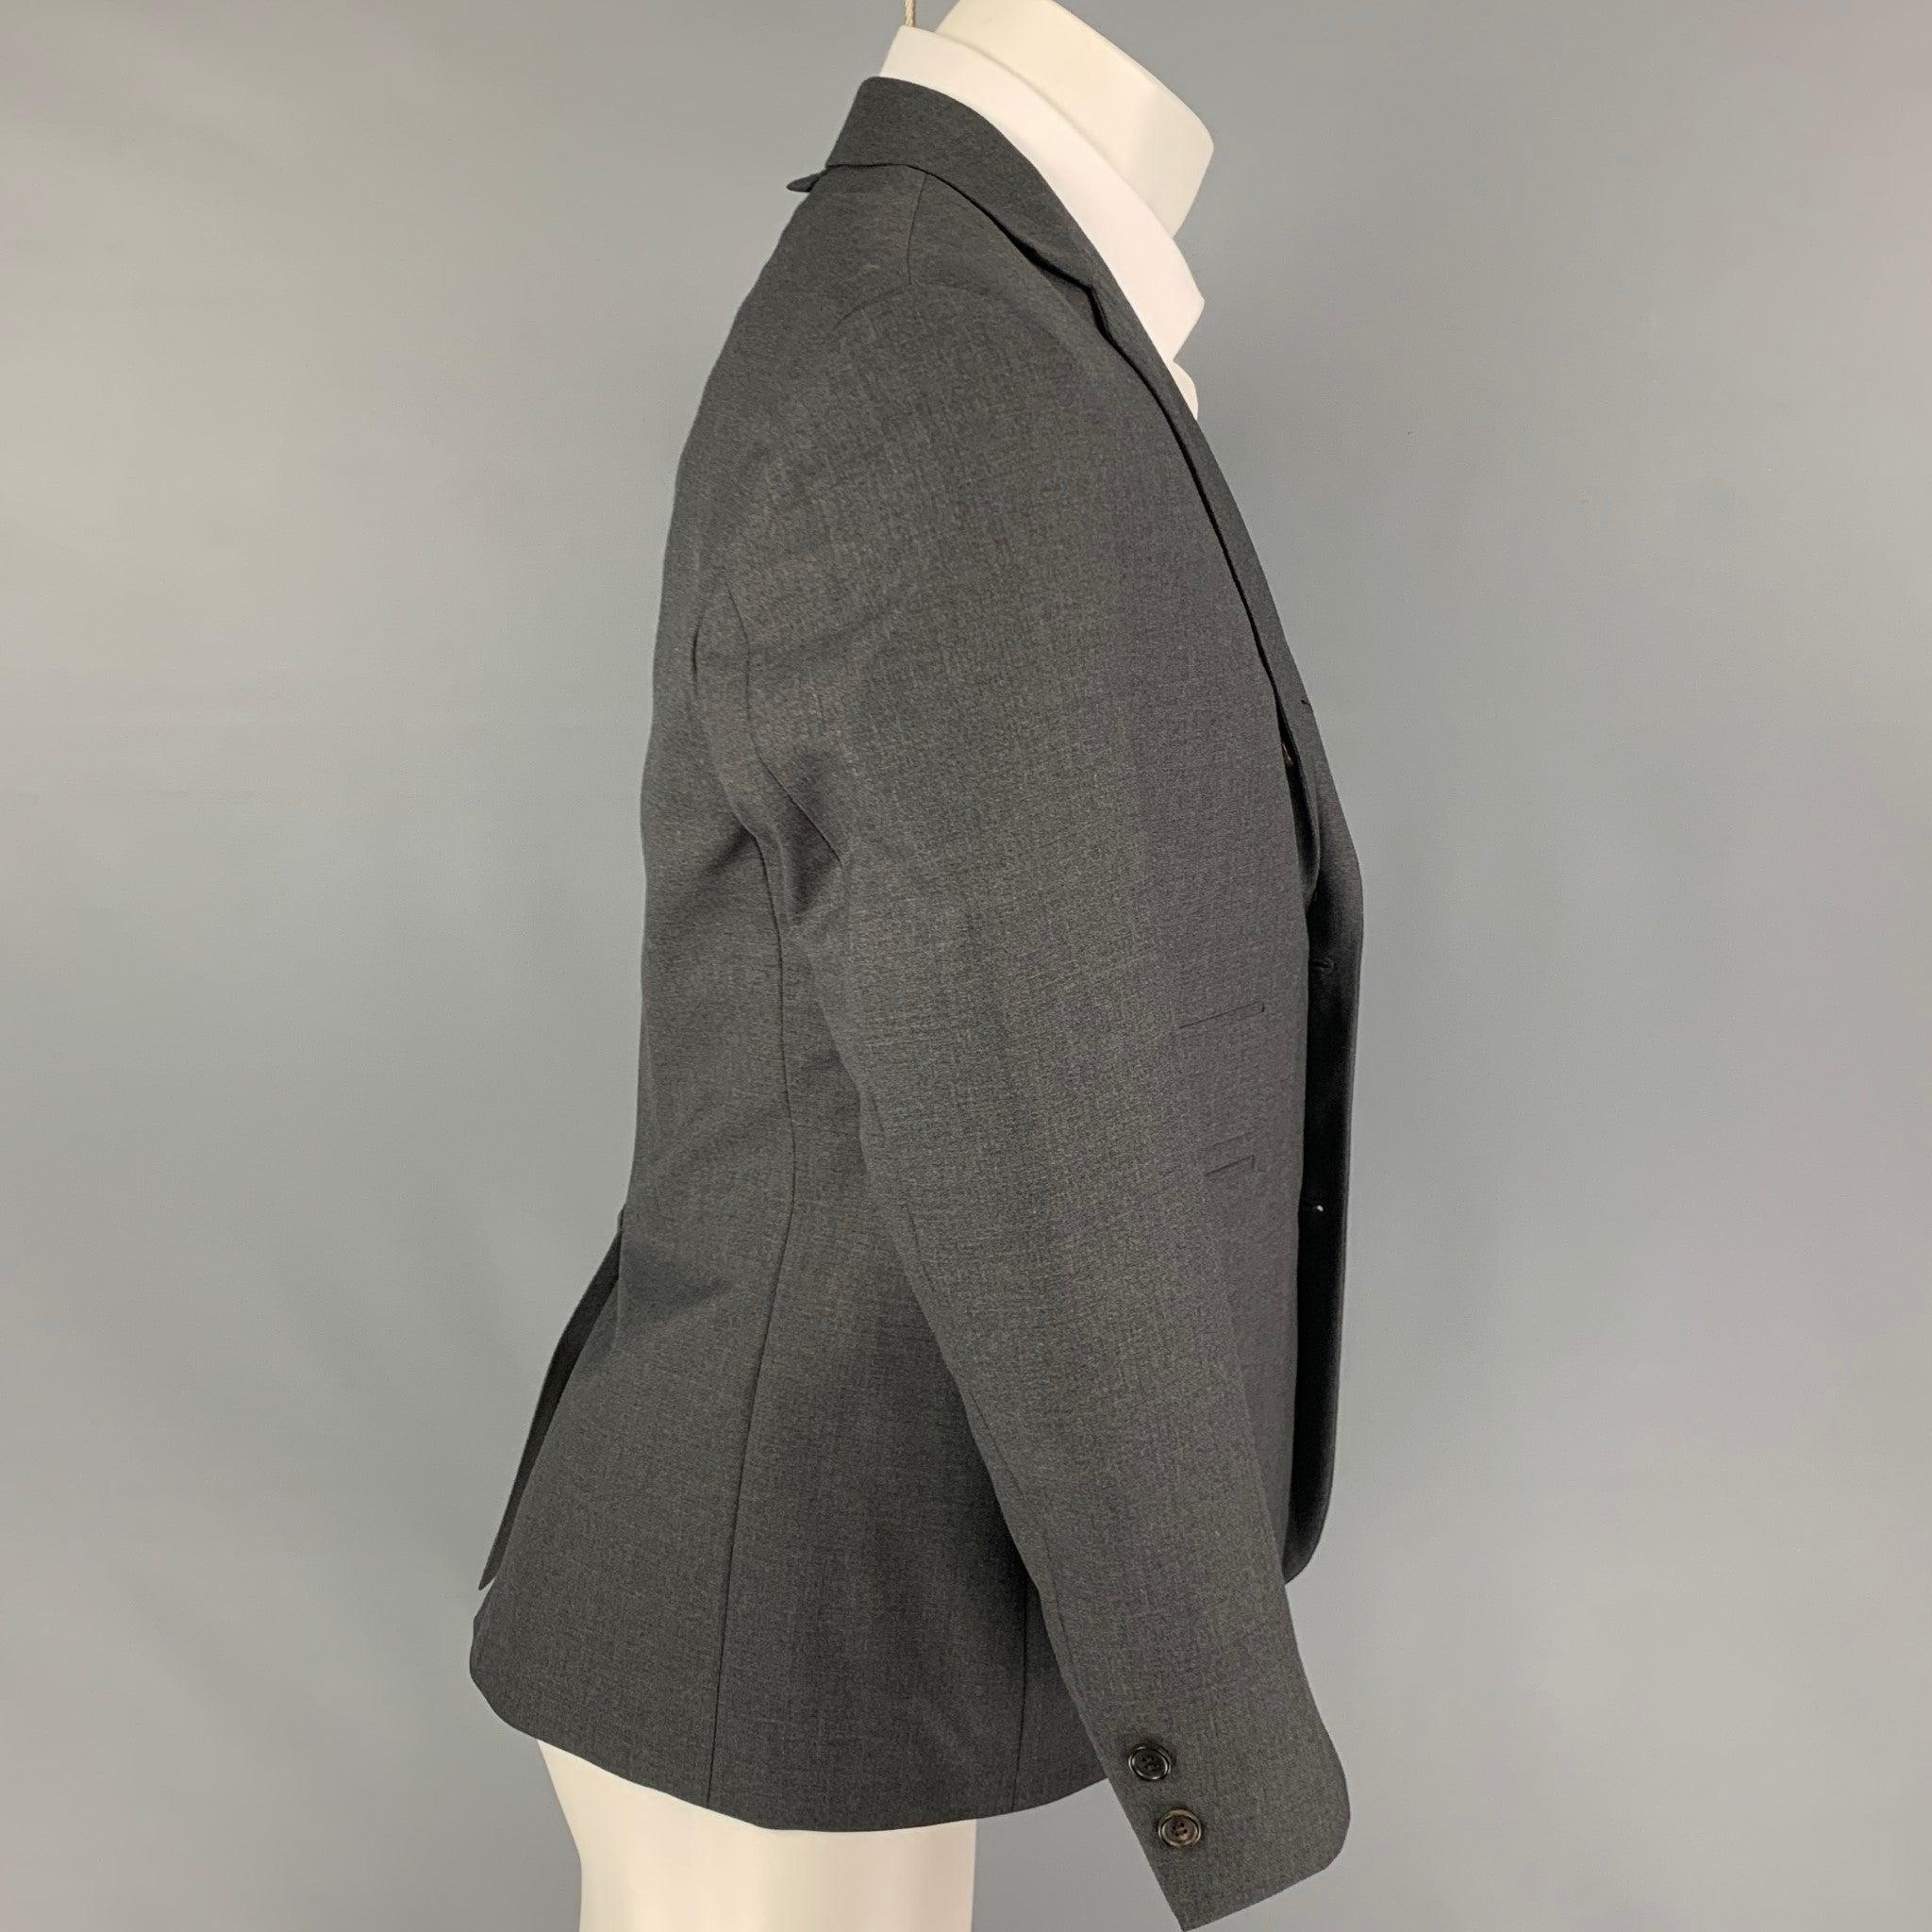 BLACK FLEECE sport coat comes in a dark gray wool with a full liner featuring a notch lapel, flap pockets, single back vent, and a double button closure. Made in USA.
Very Good
Pre-Owned Condition.  

Marked:   BB1  

Measurements: 
 
Shoulder:
18